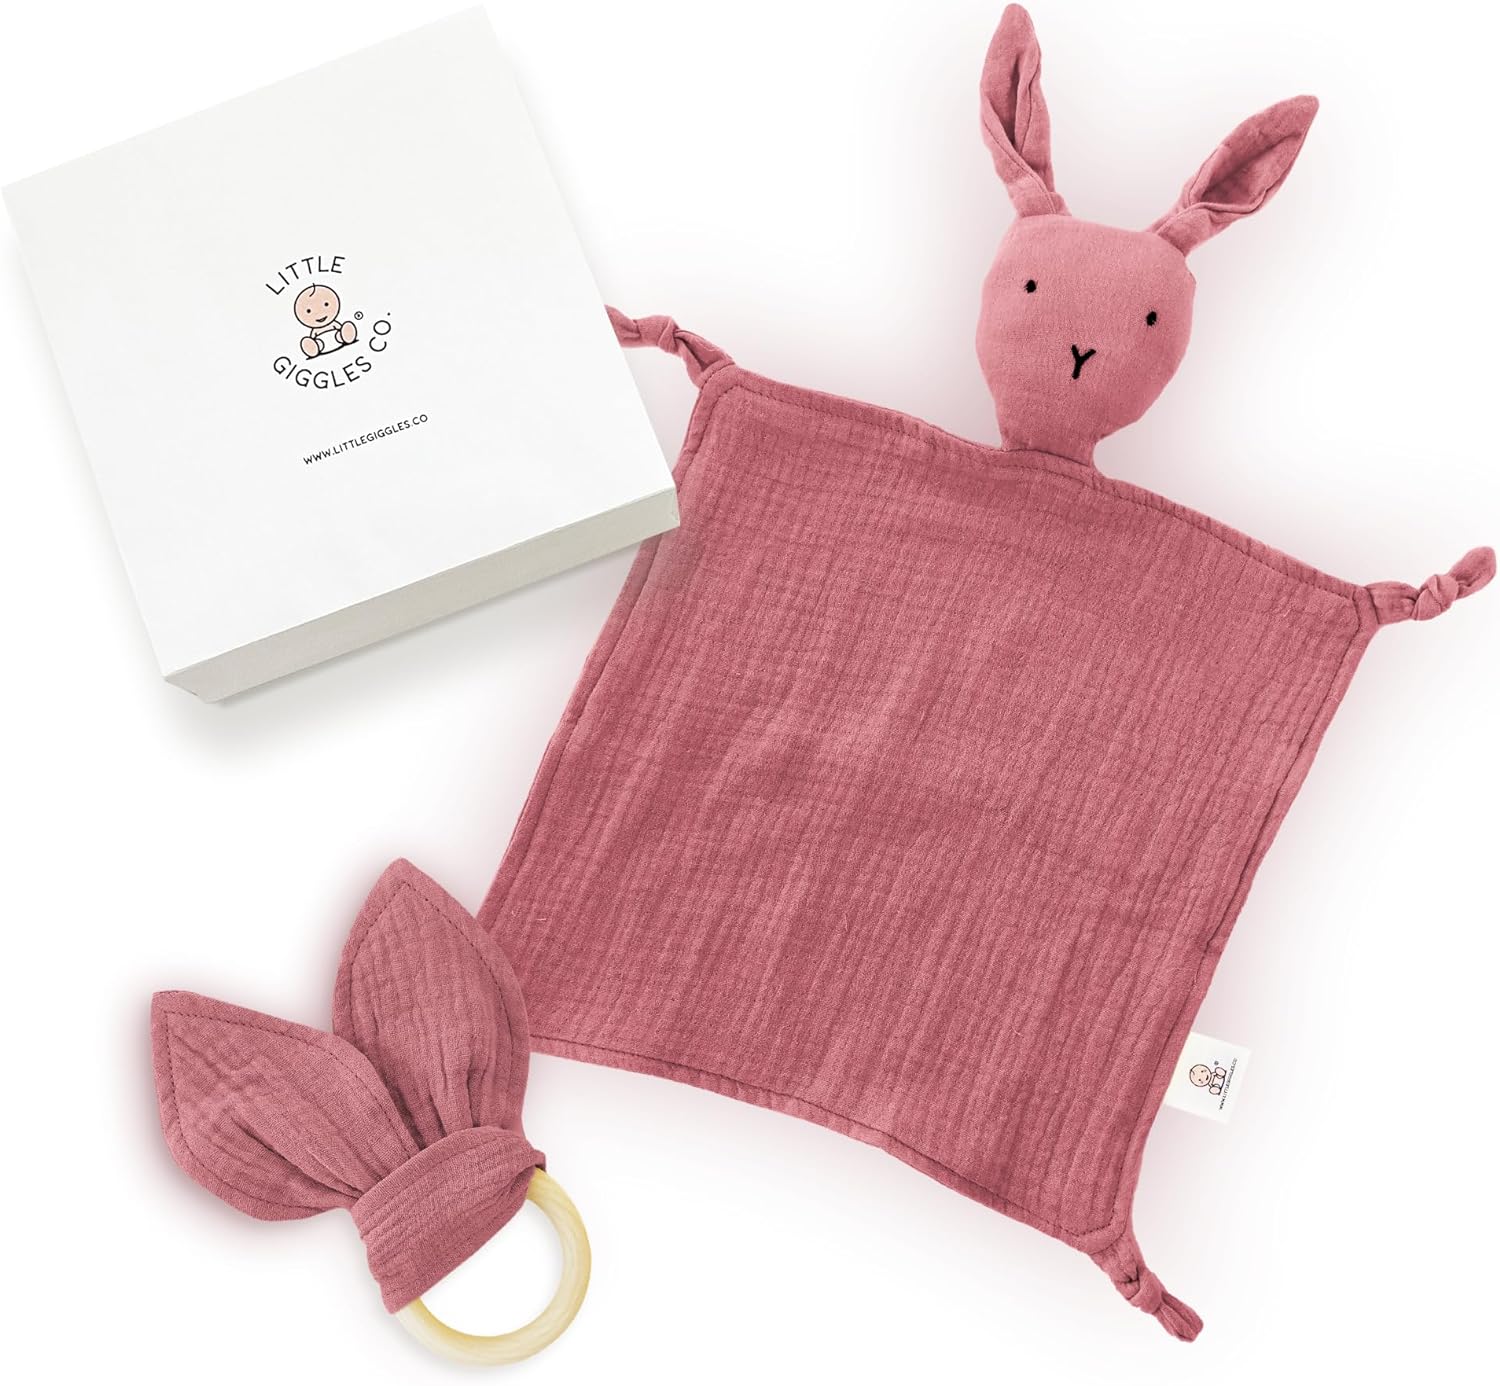 Little Giggles Co. Baby Comforters - Bunny Muslin Comforter & Sensory Ring Toy - 2 Piece Set - Rose Pink Soft Cotton Fabric - New Baby Girl Gift Set, Gender Reveal Gifts & Baby Essentials